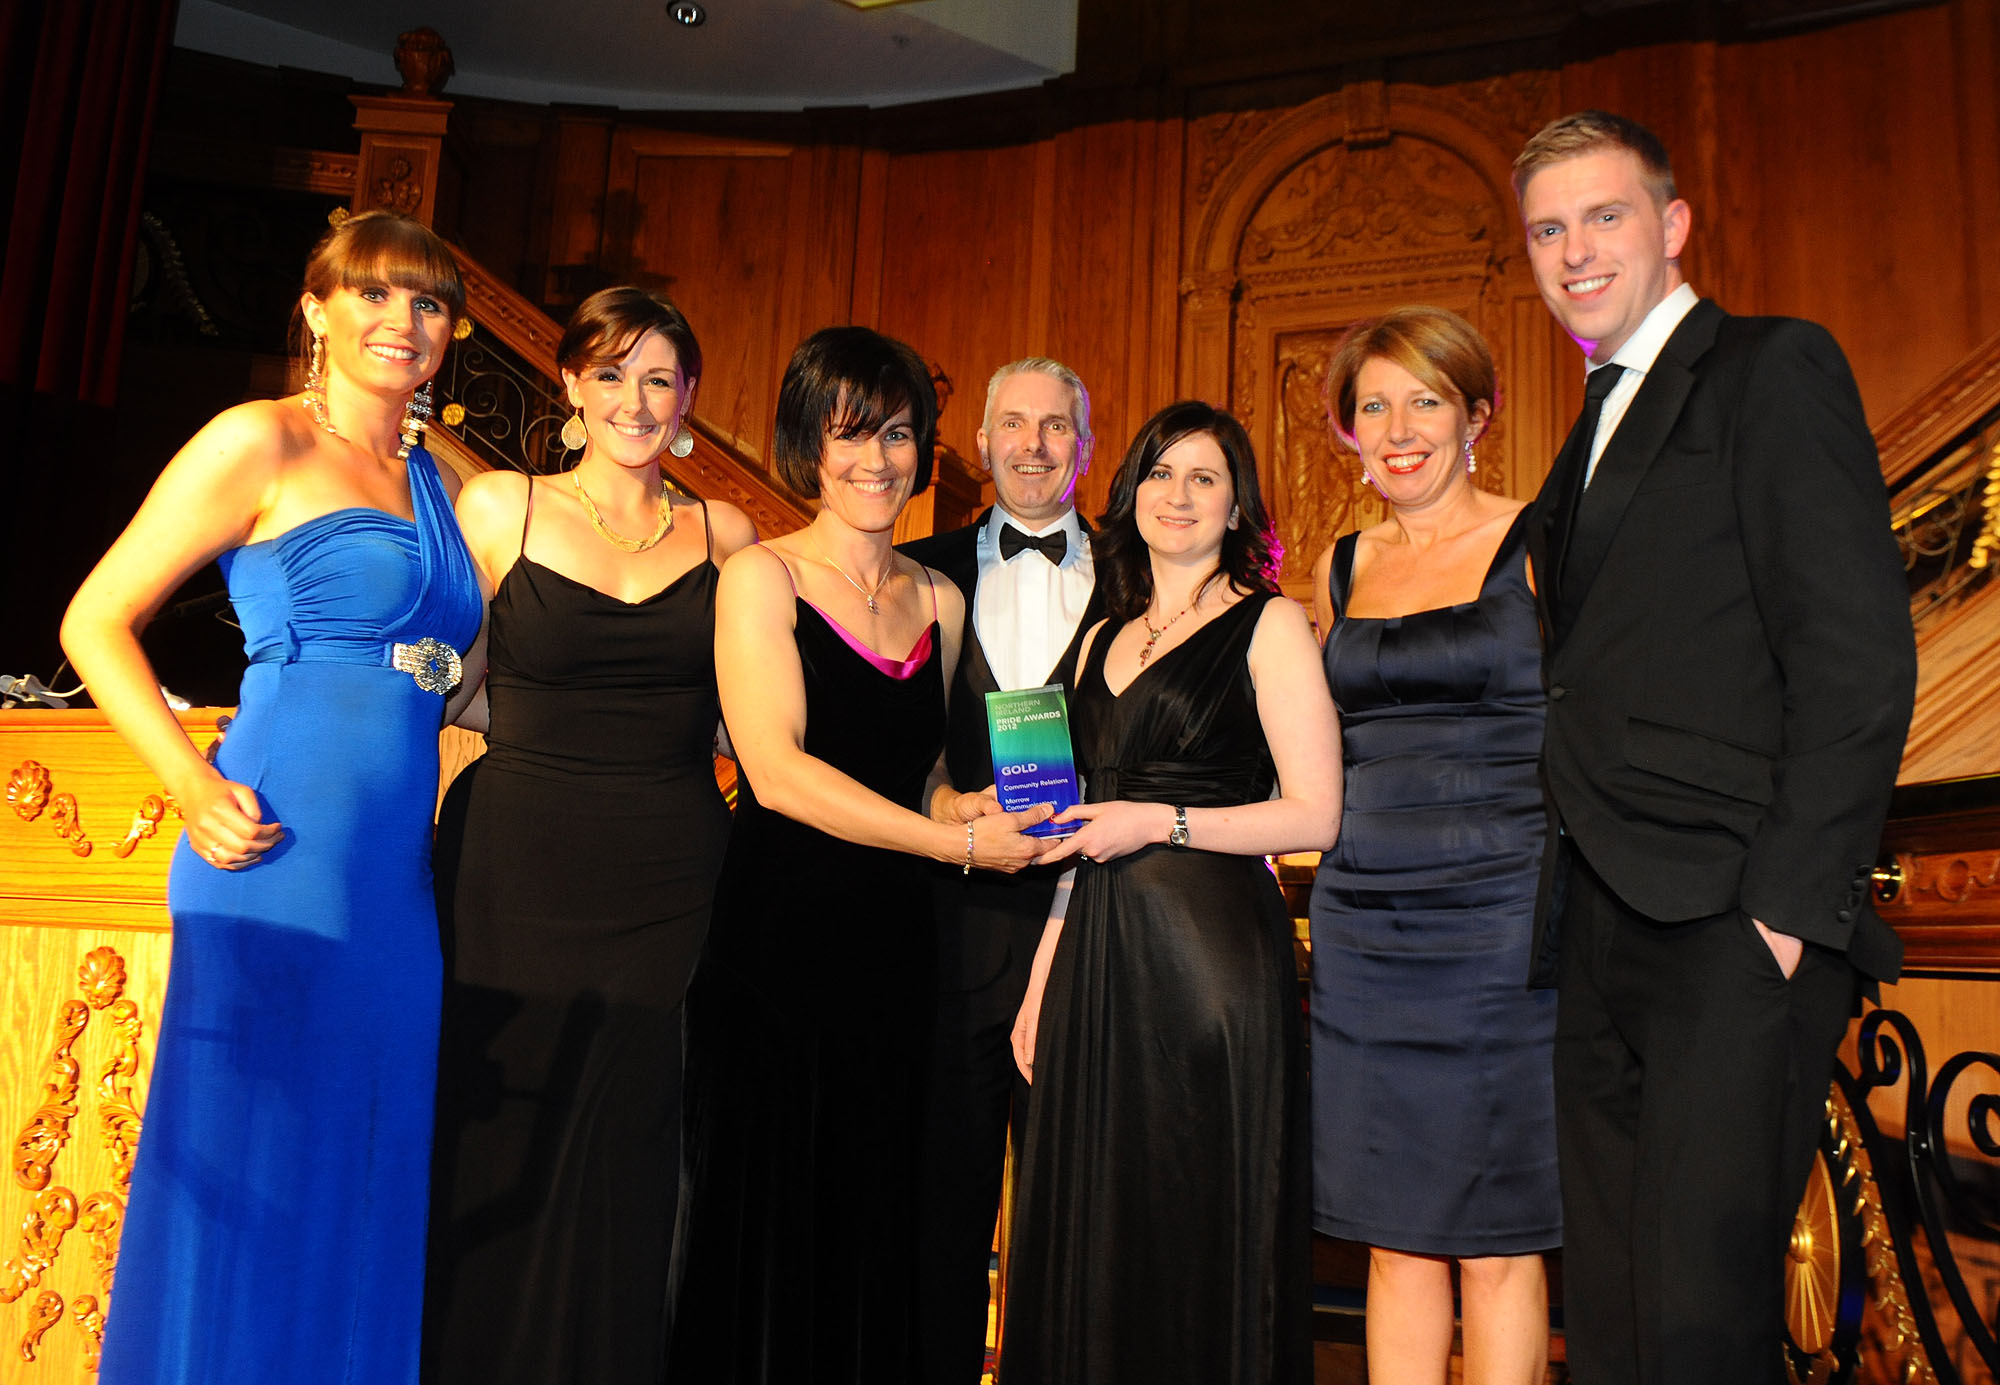 Pictured at the event are Seona McGrath and Kelly McKee, Morrow Communications; Marie Cowan, Project Manager Tellus Border Project, Geological Survey of Northern Ireland; Richard Gaston, Category Sponsor The Lyric Theatre; Mairead Glennon, Assistant Project Manager, Tellus Border Project, Geological Survey of Ireland; Claire Bonner, Morrow Communications and host Marc Mallet of UTV.